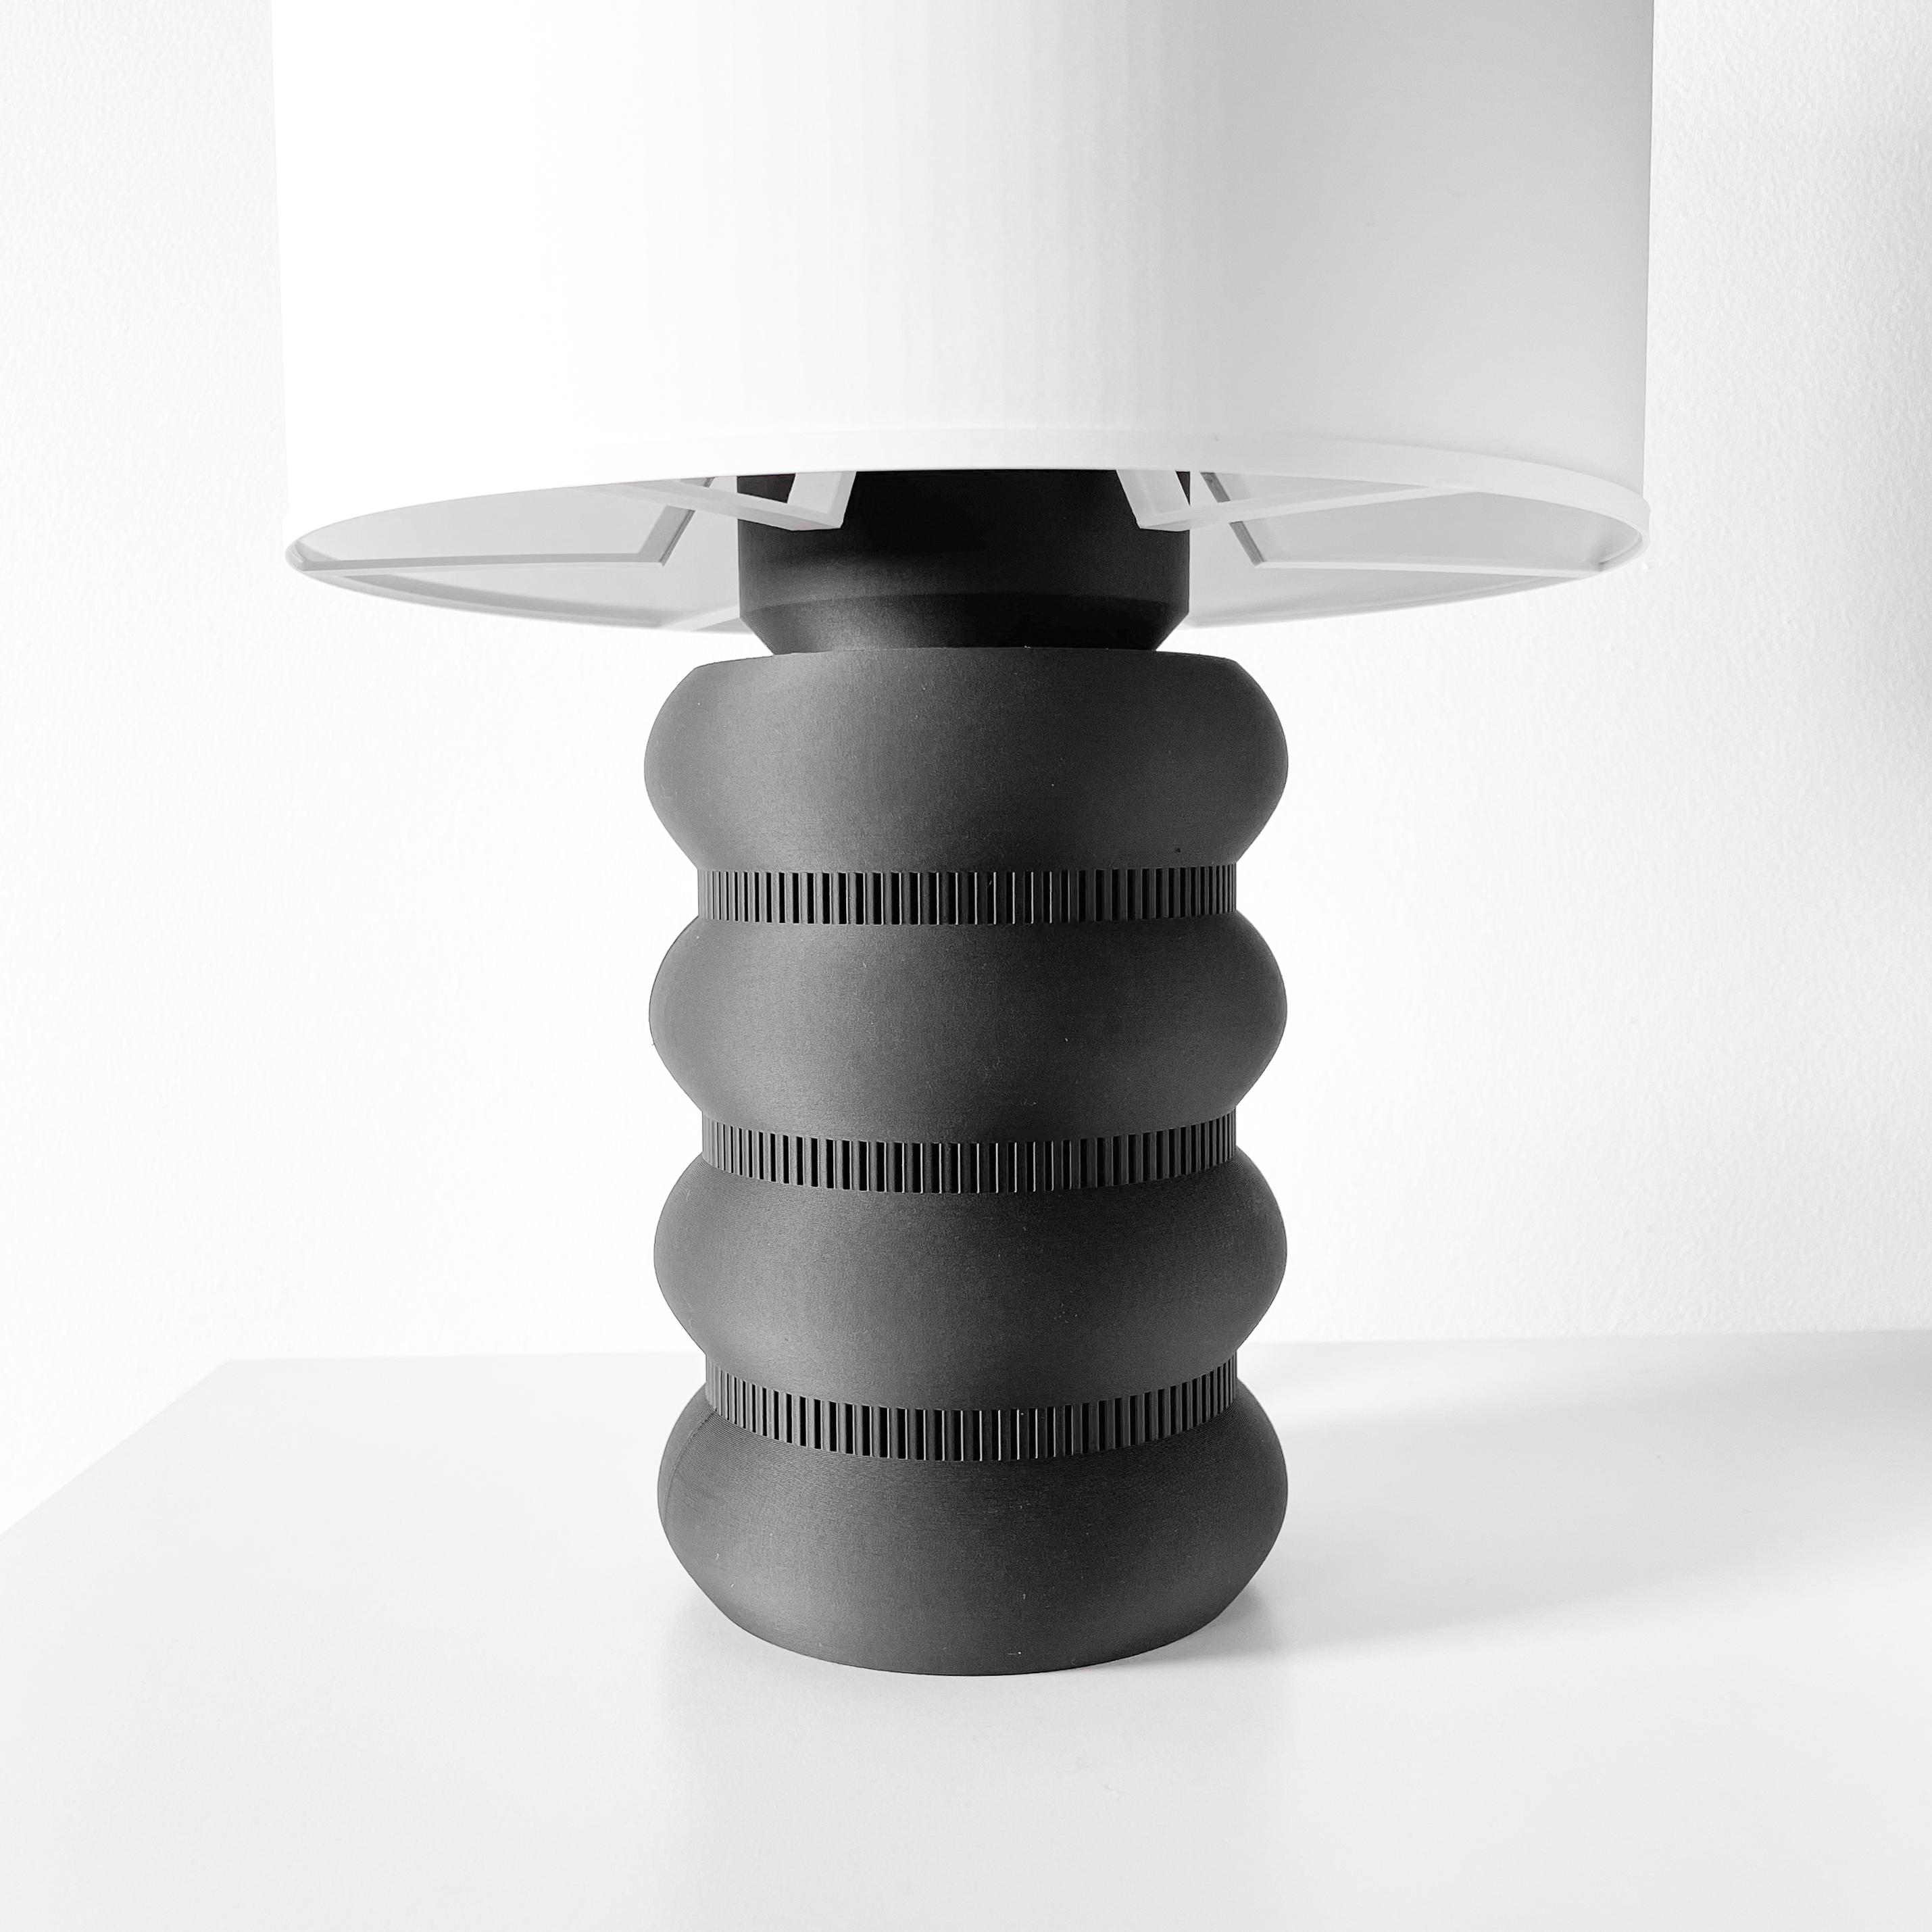 The Santi Lamp | Modern and Unique Home Decor for Desk and Table 3d model